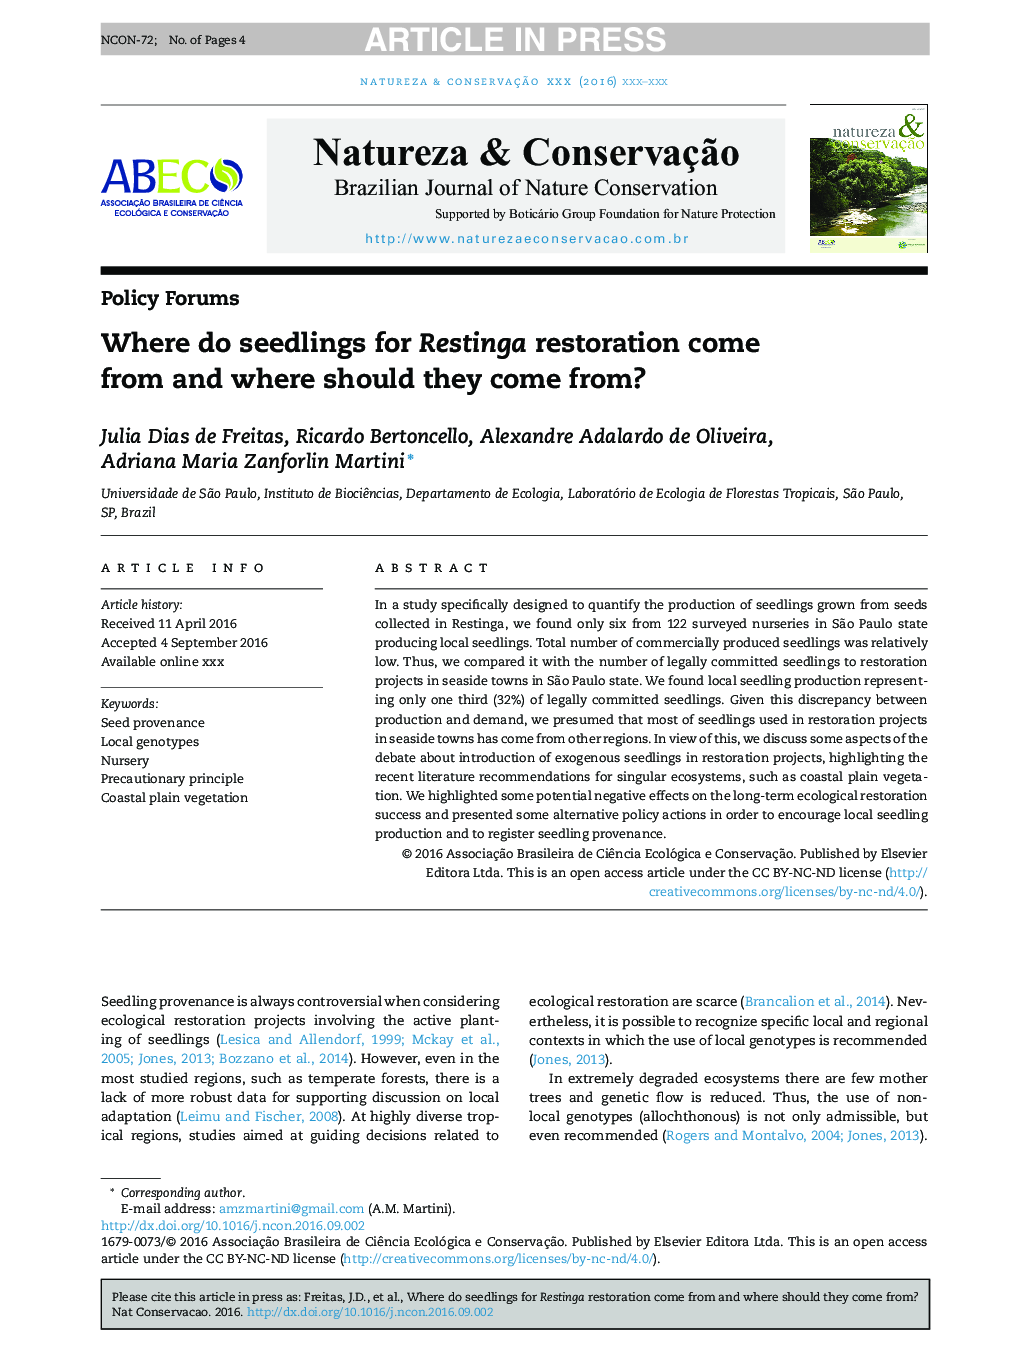 Where do seedlings for Restinga restoration come from and where should they come from?